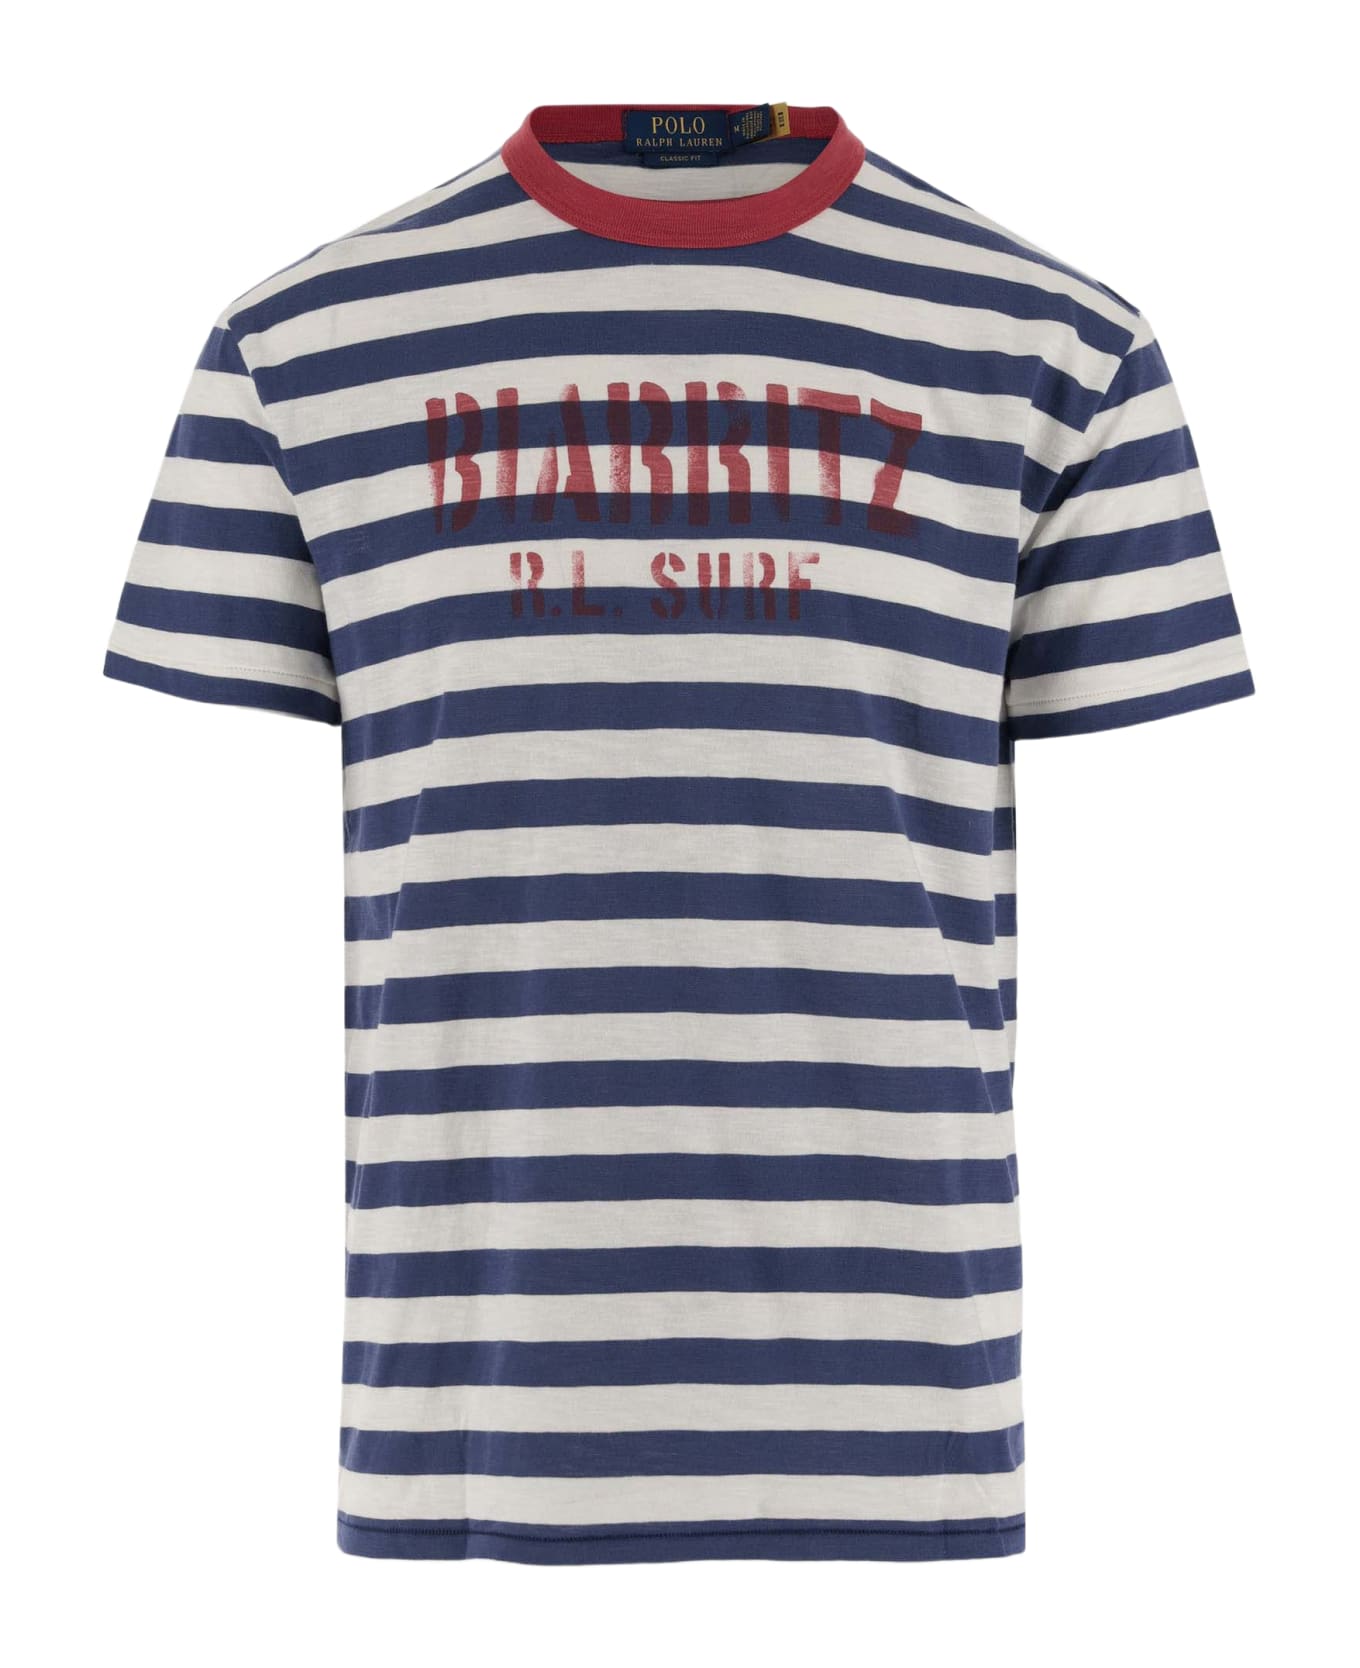 Polo Ralph Lauren Cotton T-shirt With Striped Pattern And Logo Polo Ralph Lauren - Red